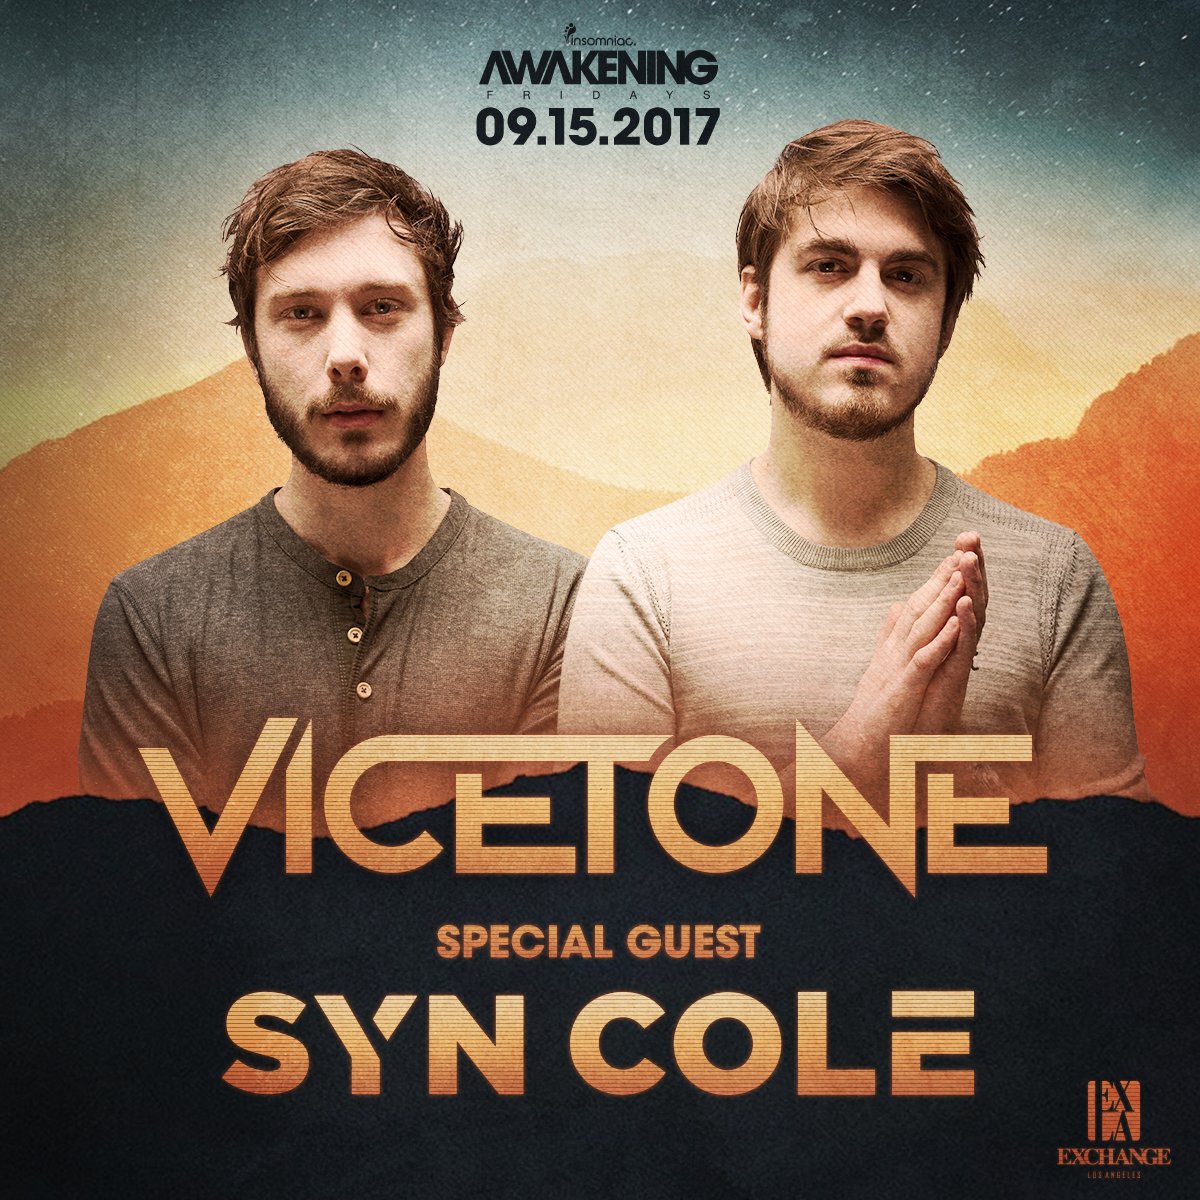 LOS ANGELES! We're doing a huge show at @ExchangeLA on the 9/15, get your tickets now!! ticketf.ly/2tWASOp https://t.co/ytAb5gkSPI